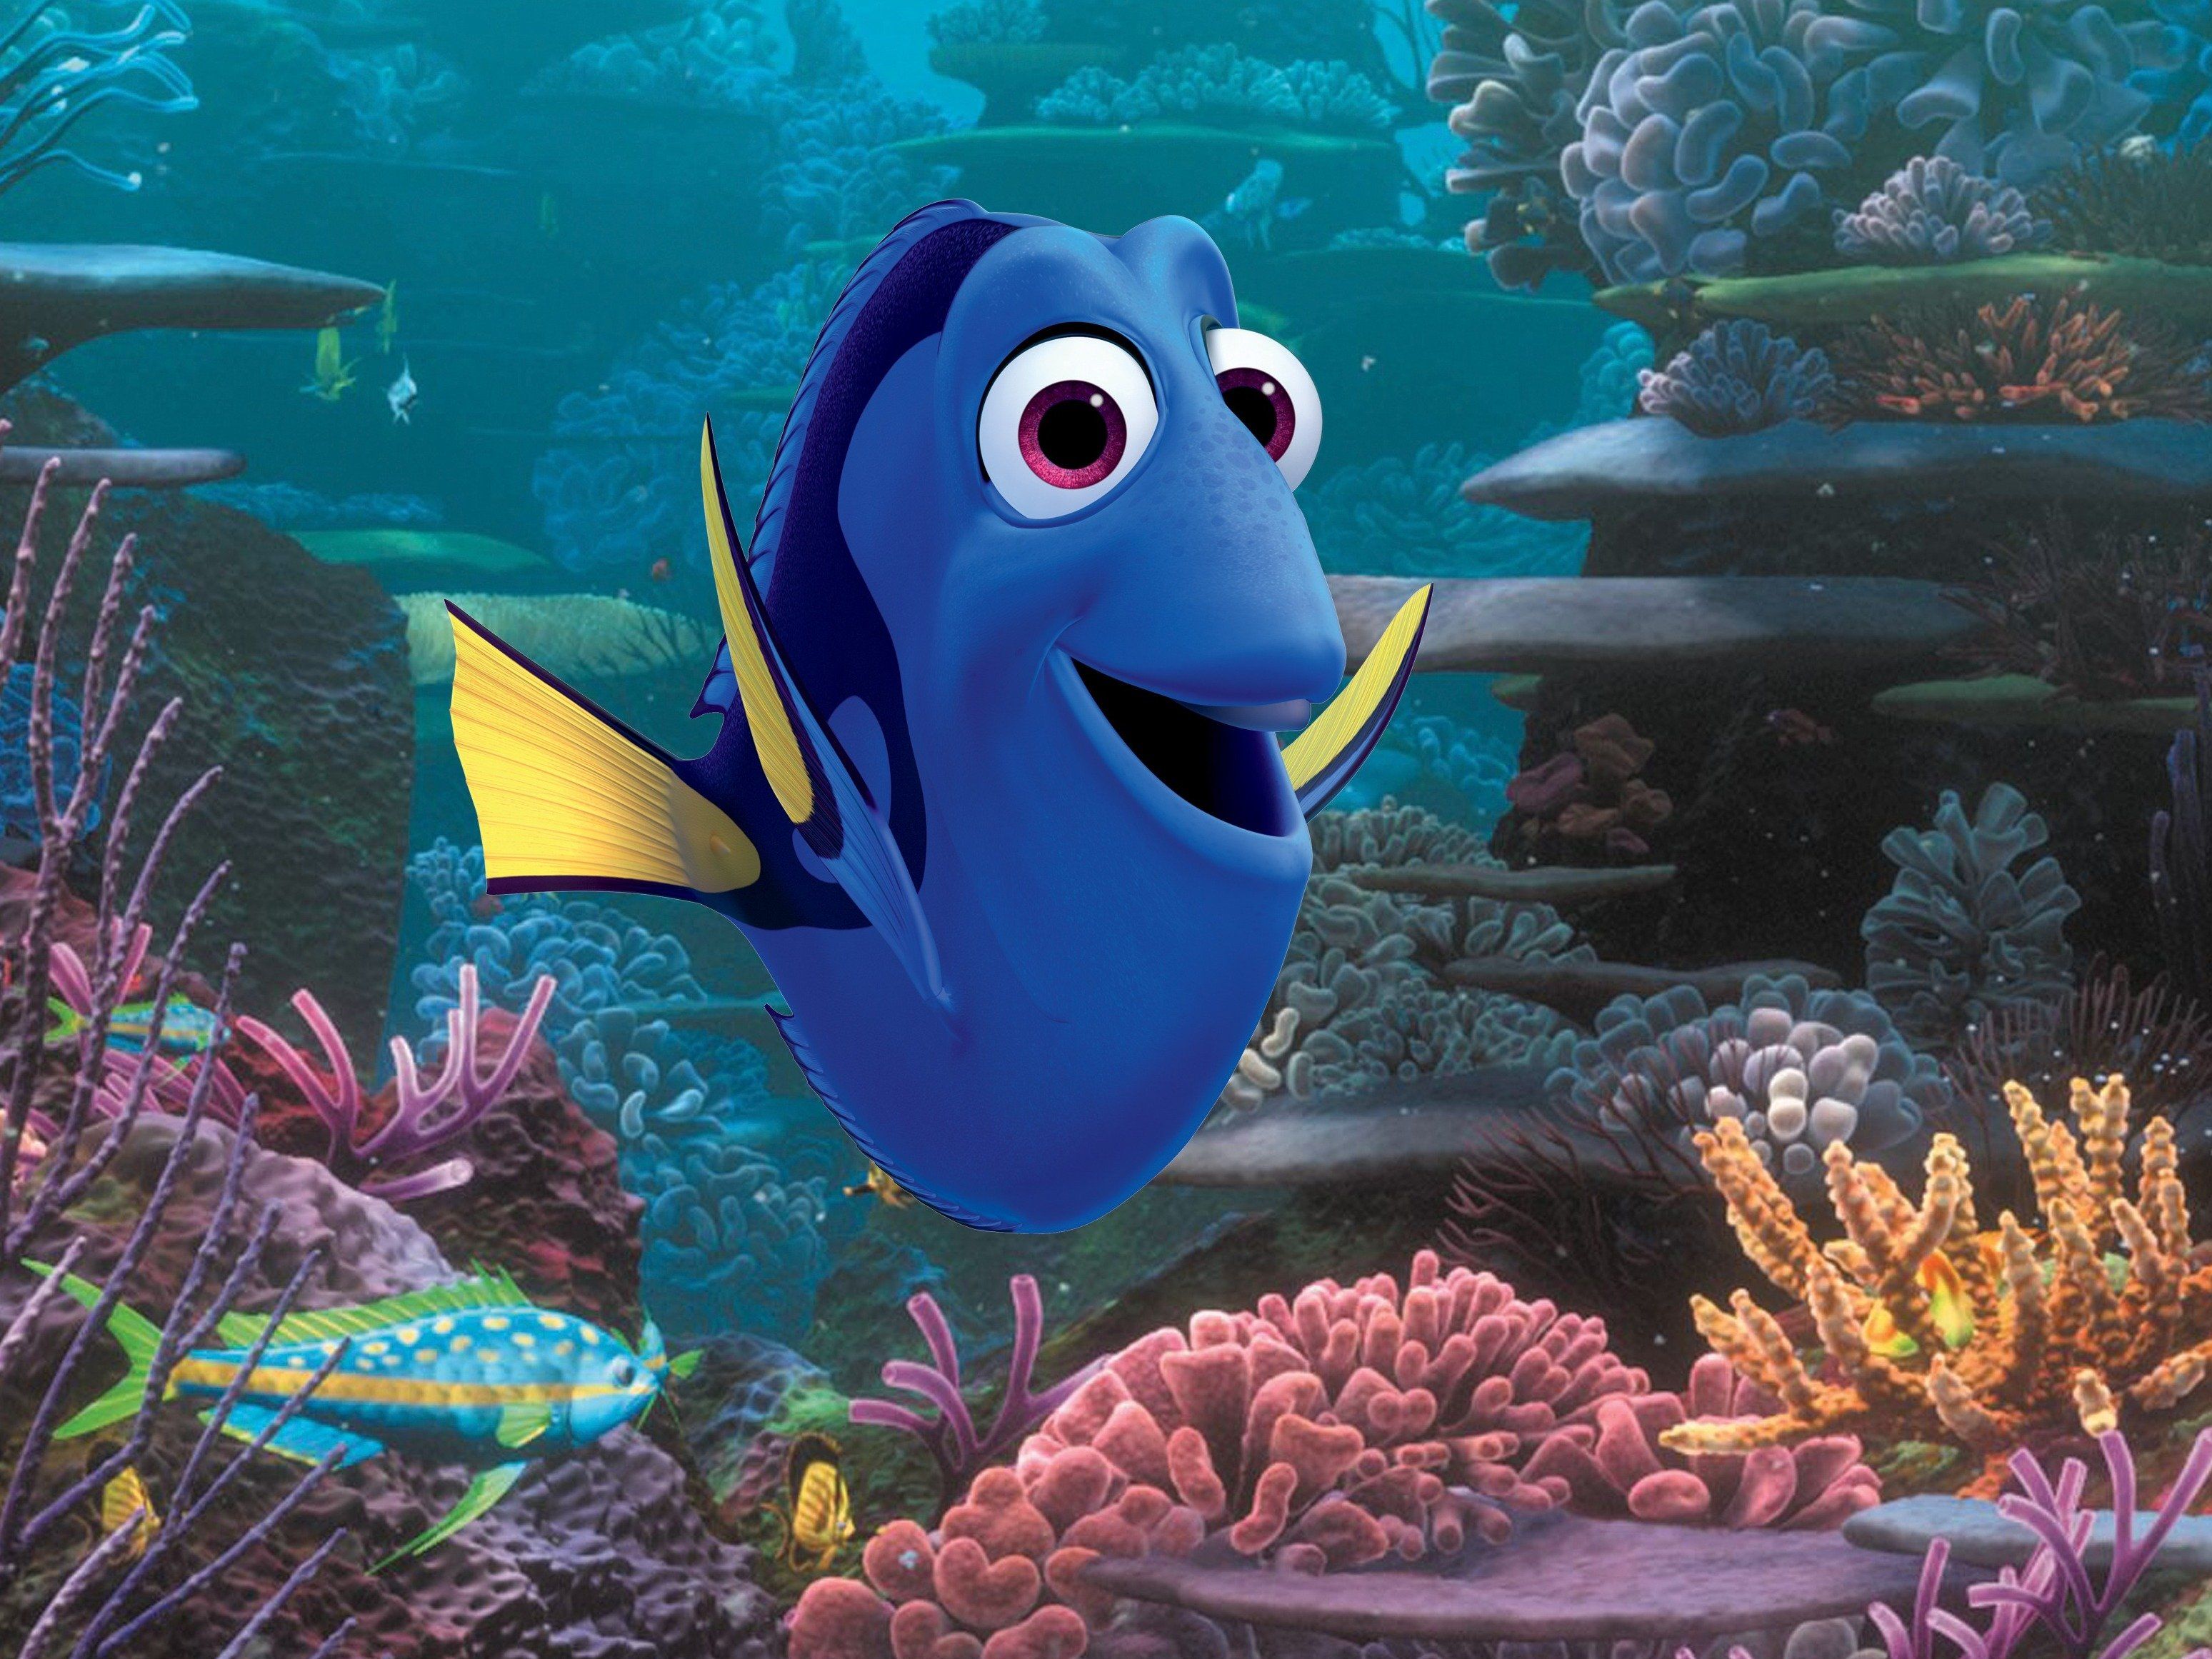 Finding Dory is now the biggest animated film in US box office history